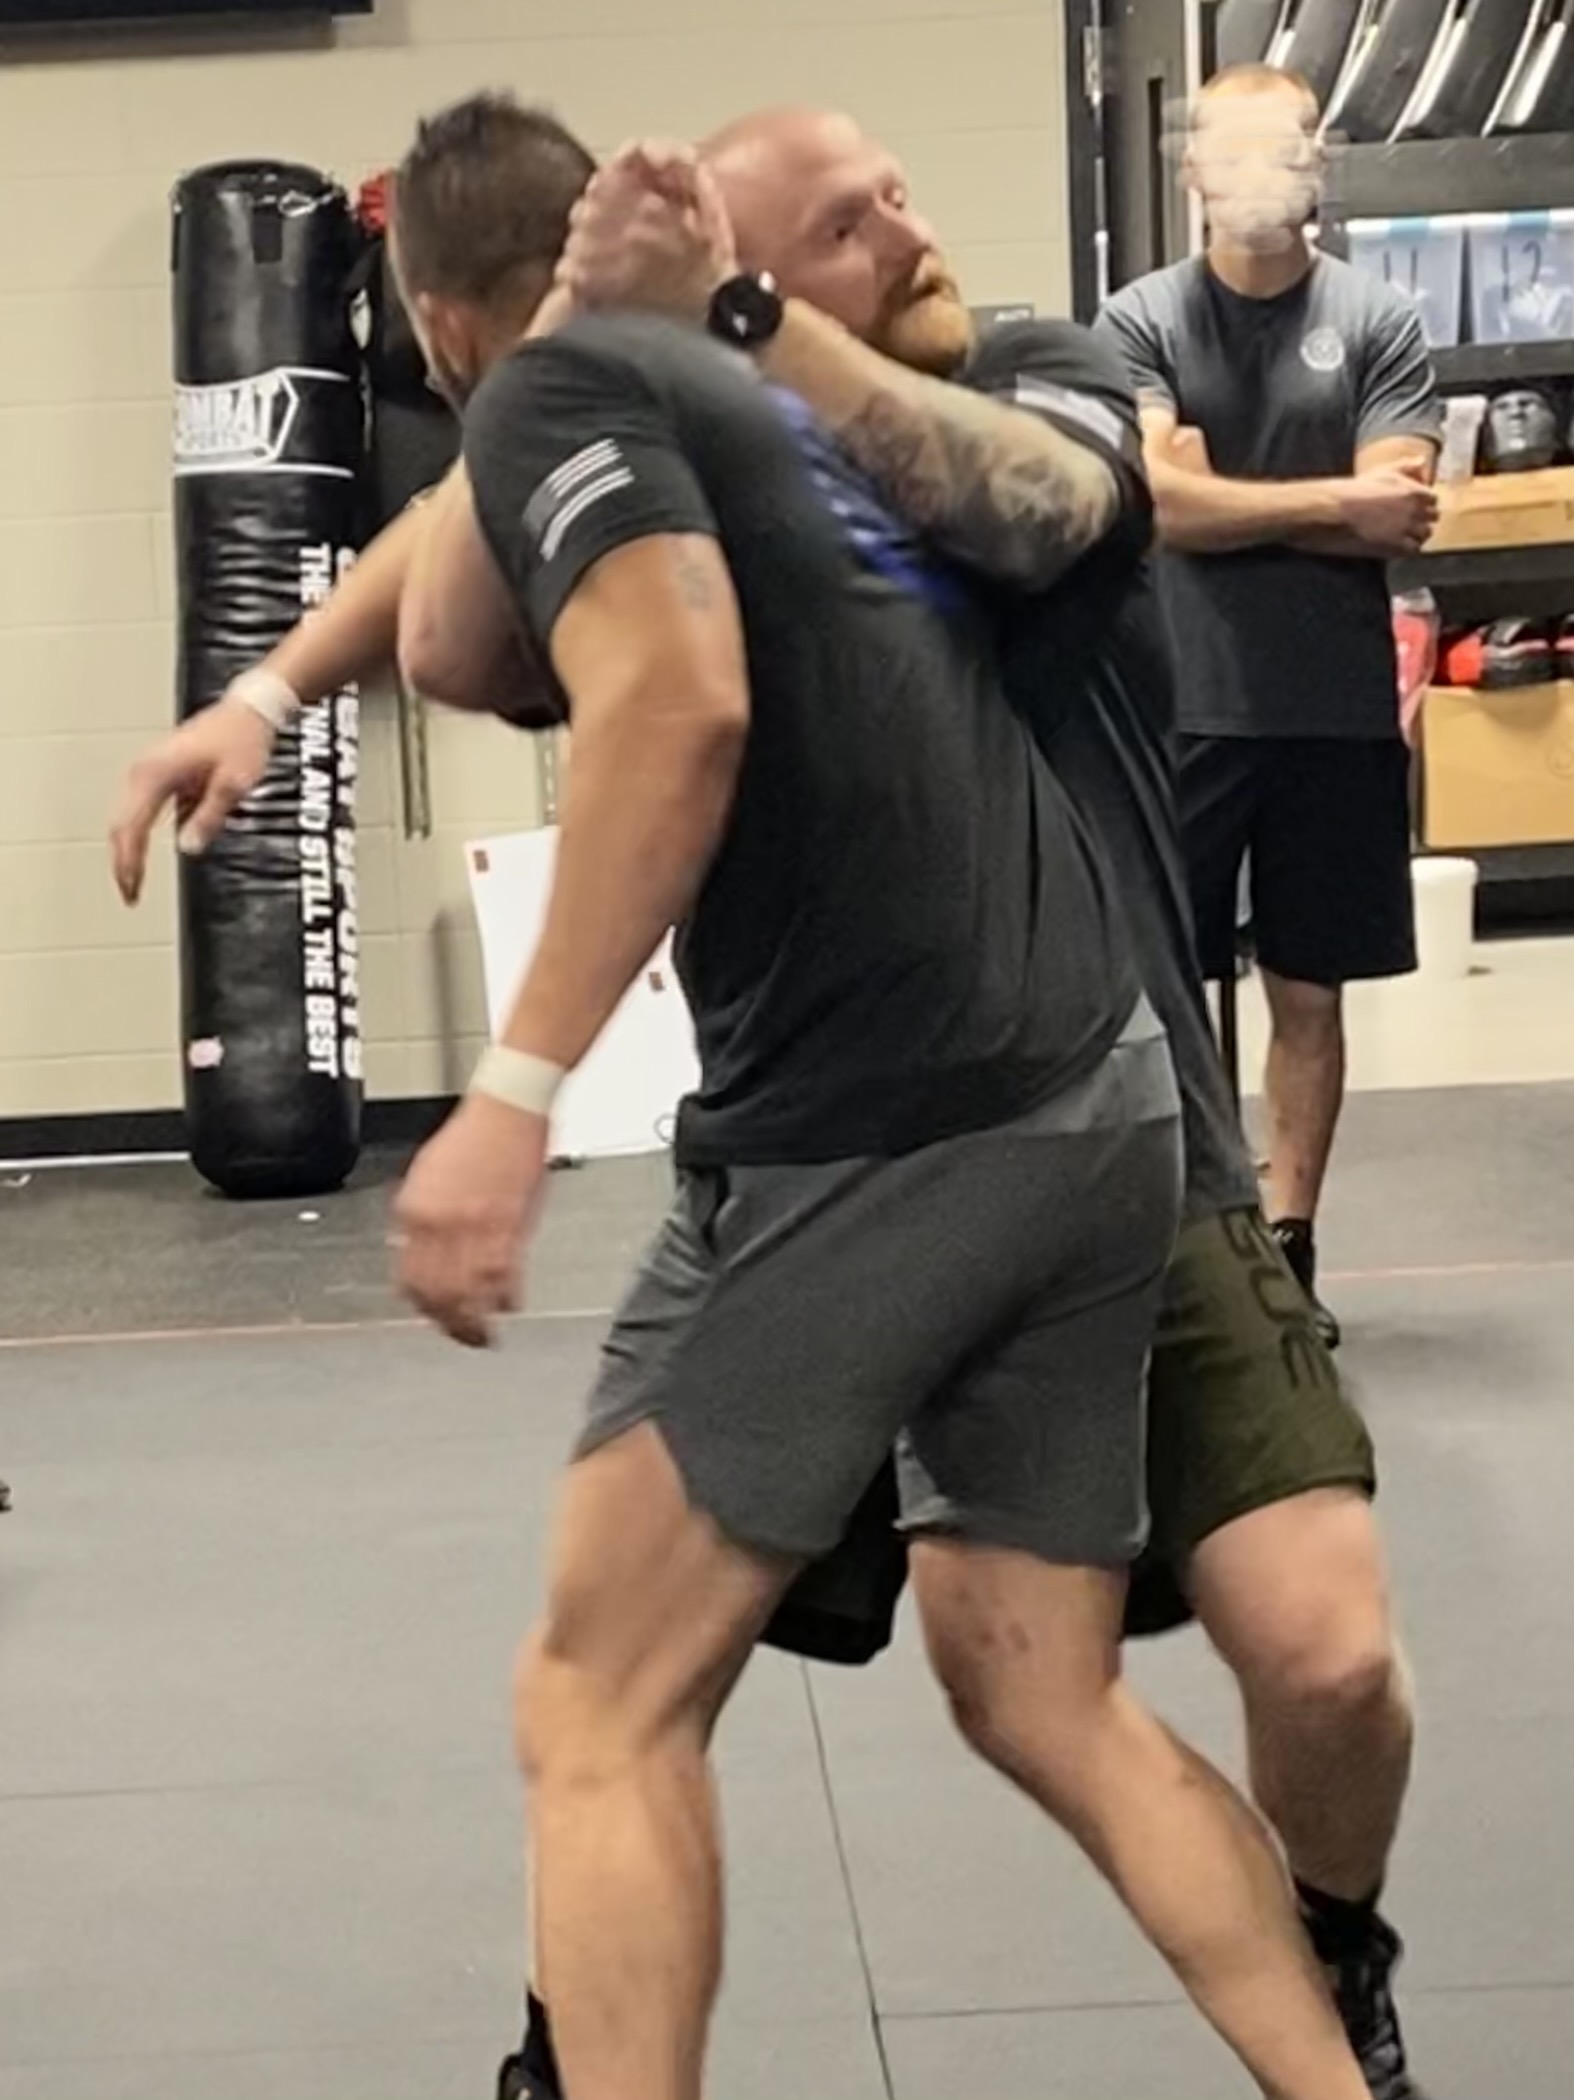 POLICE COMBATIVES